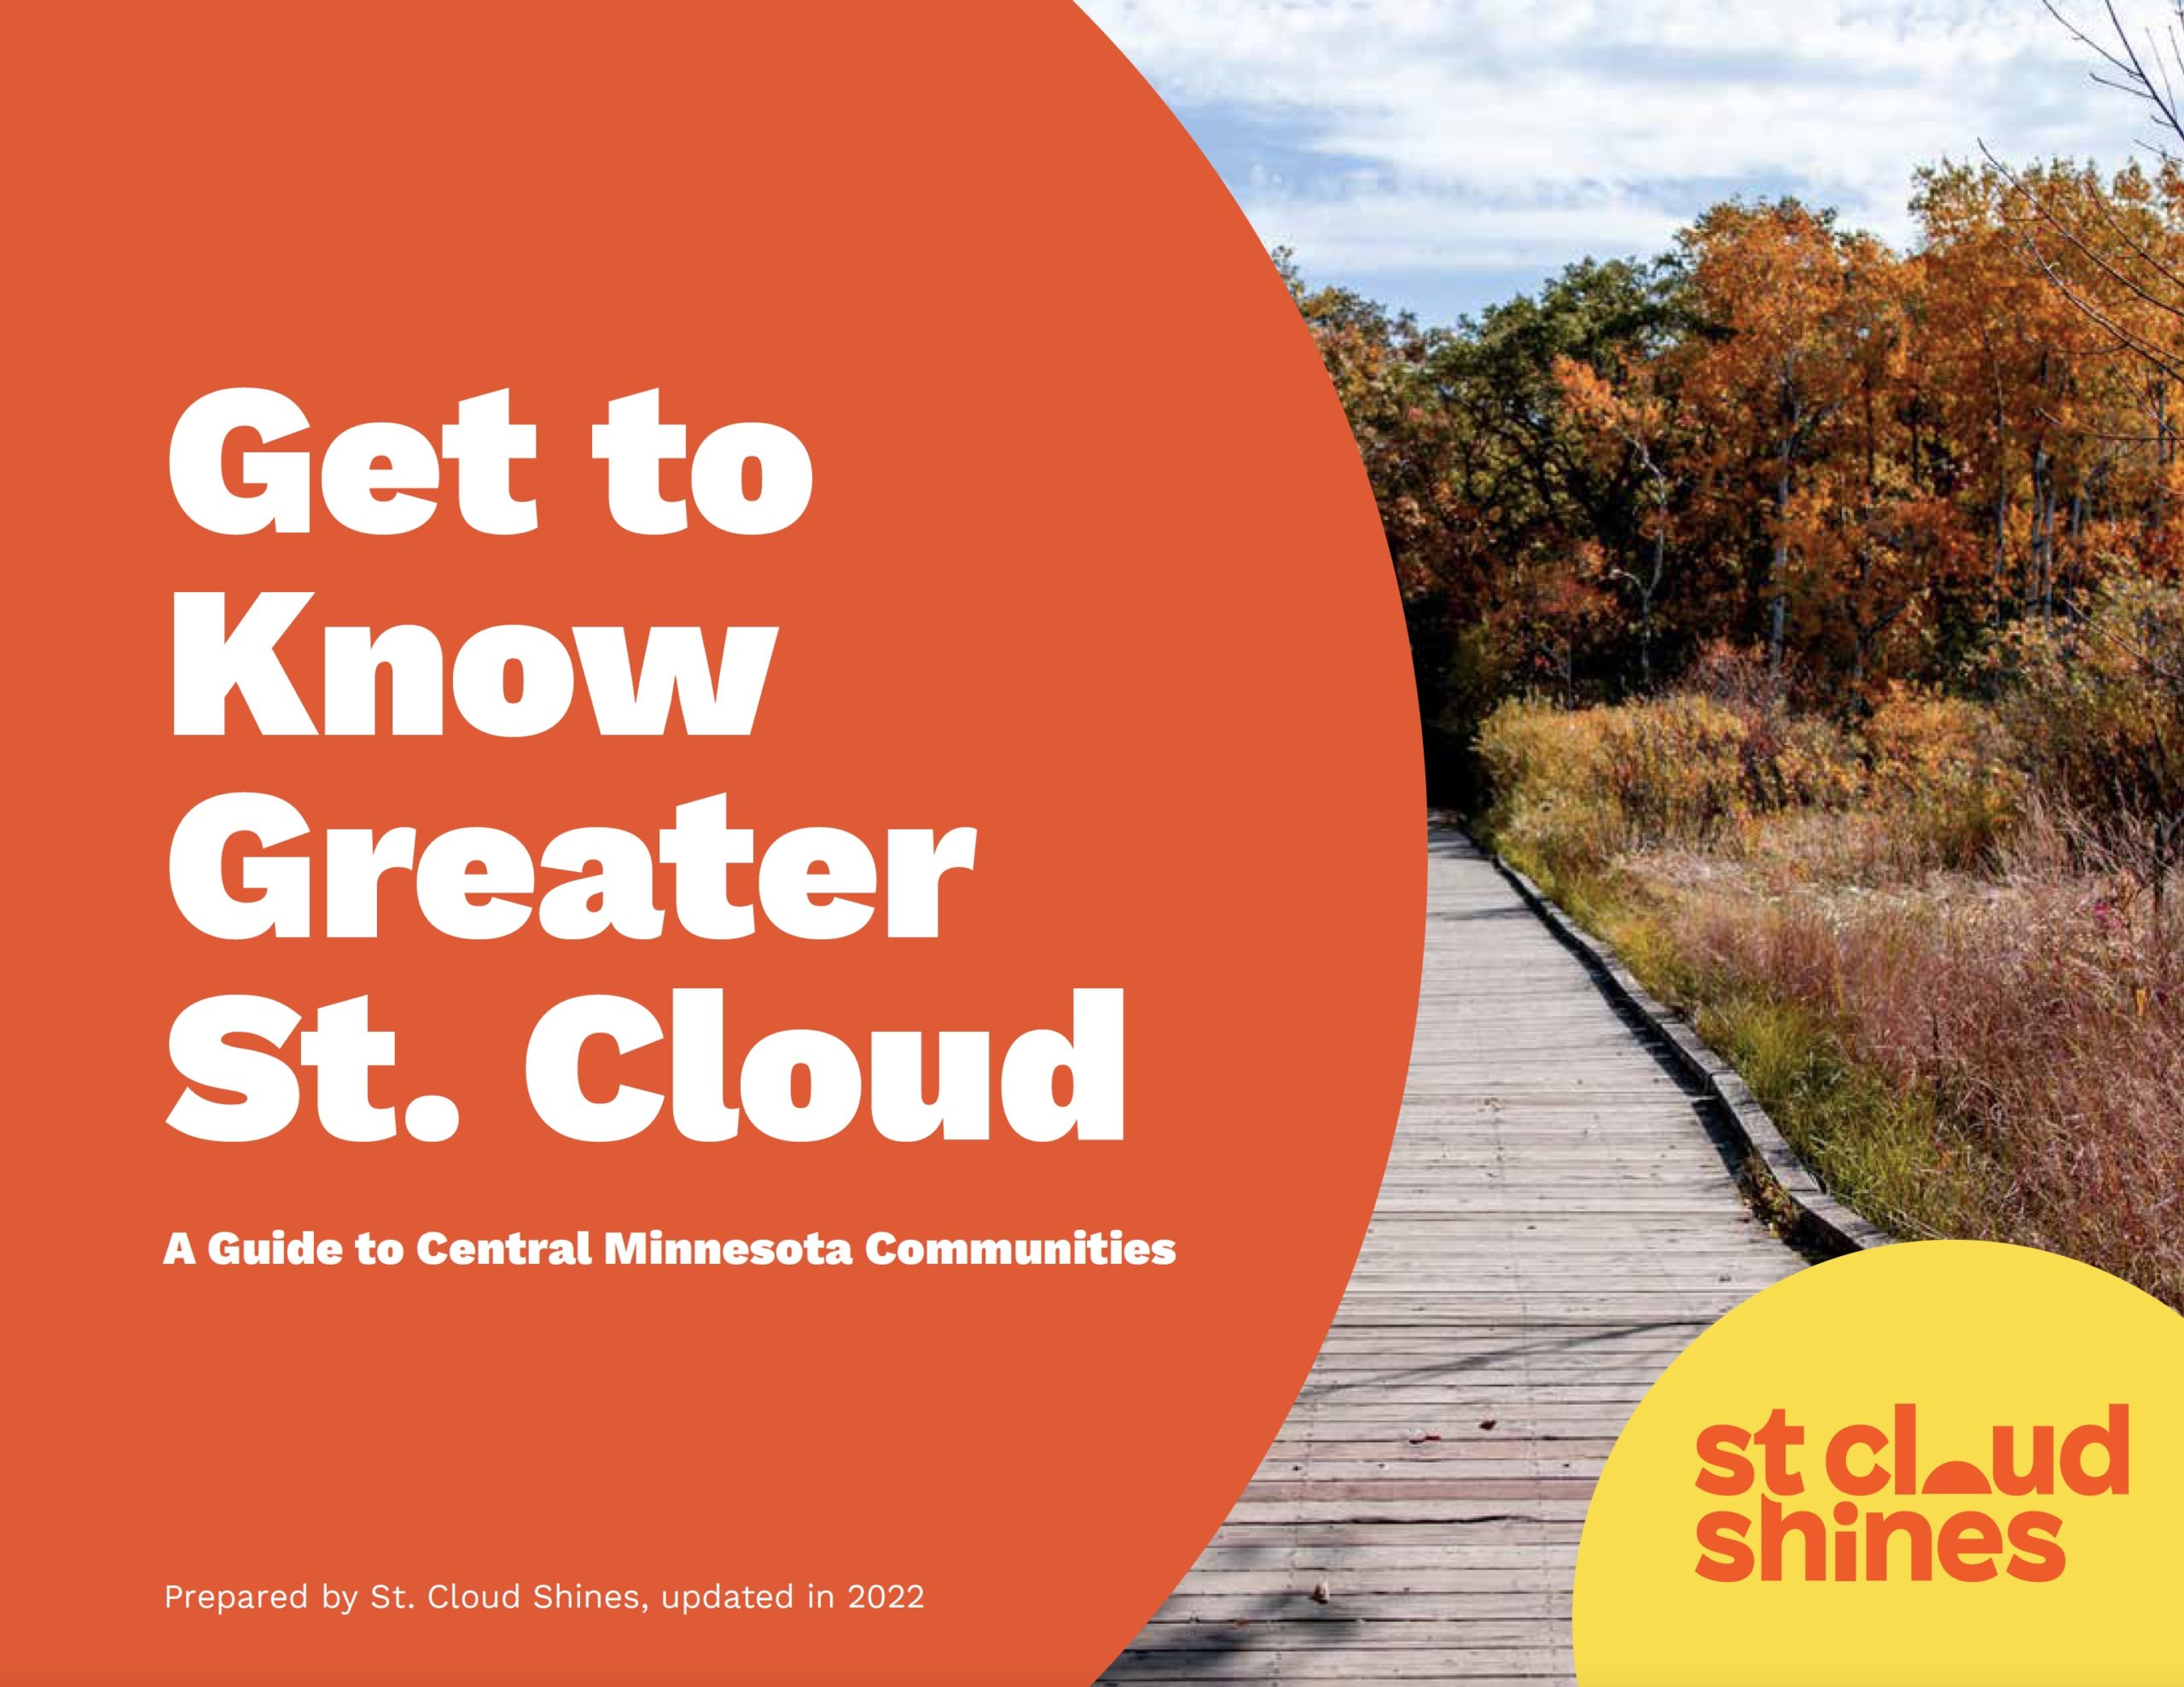 Get to Know Greater St. Cloud